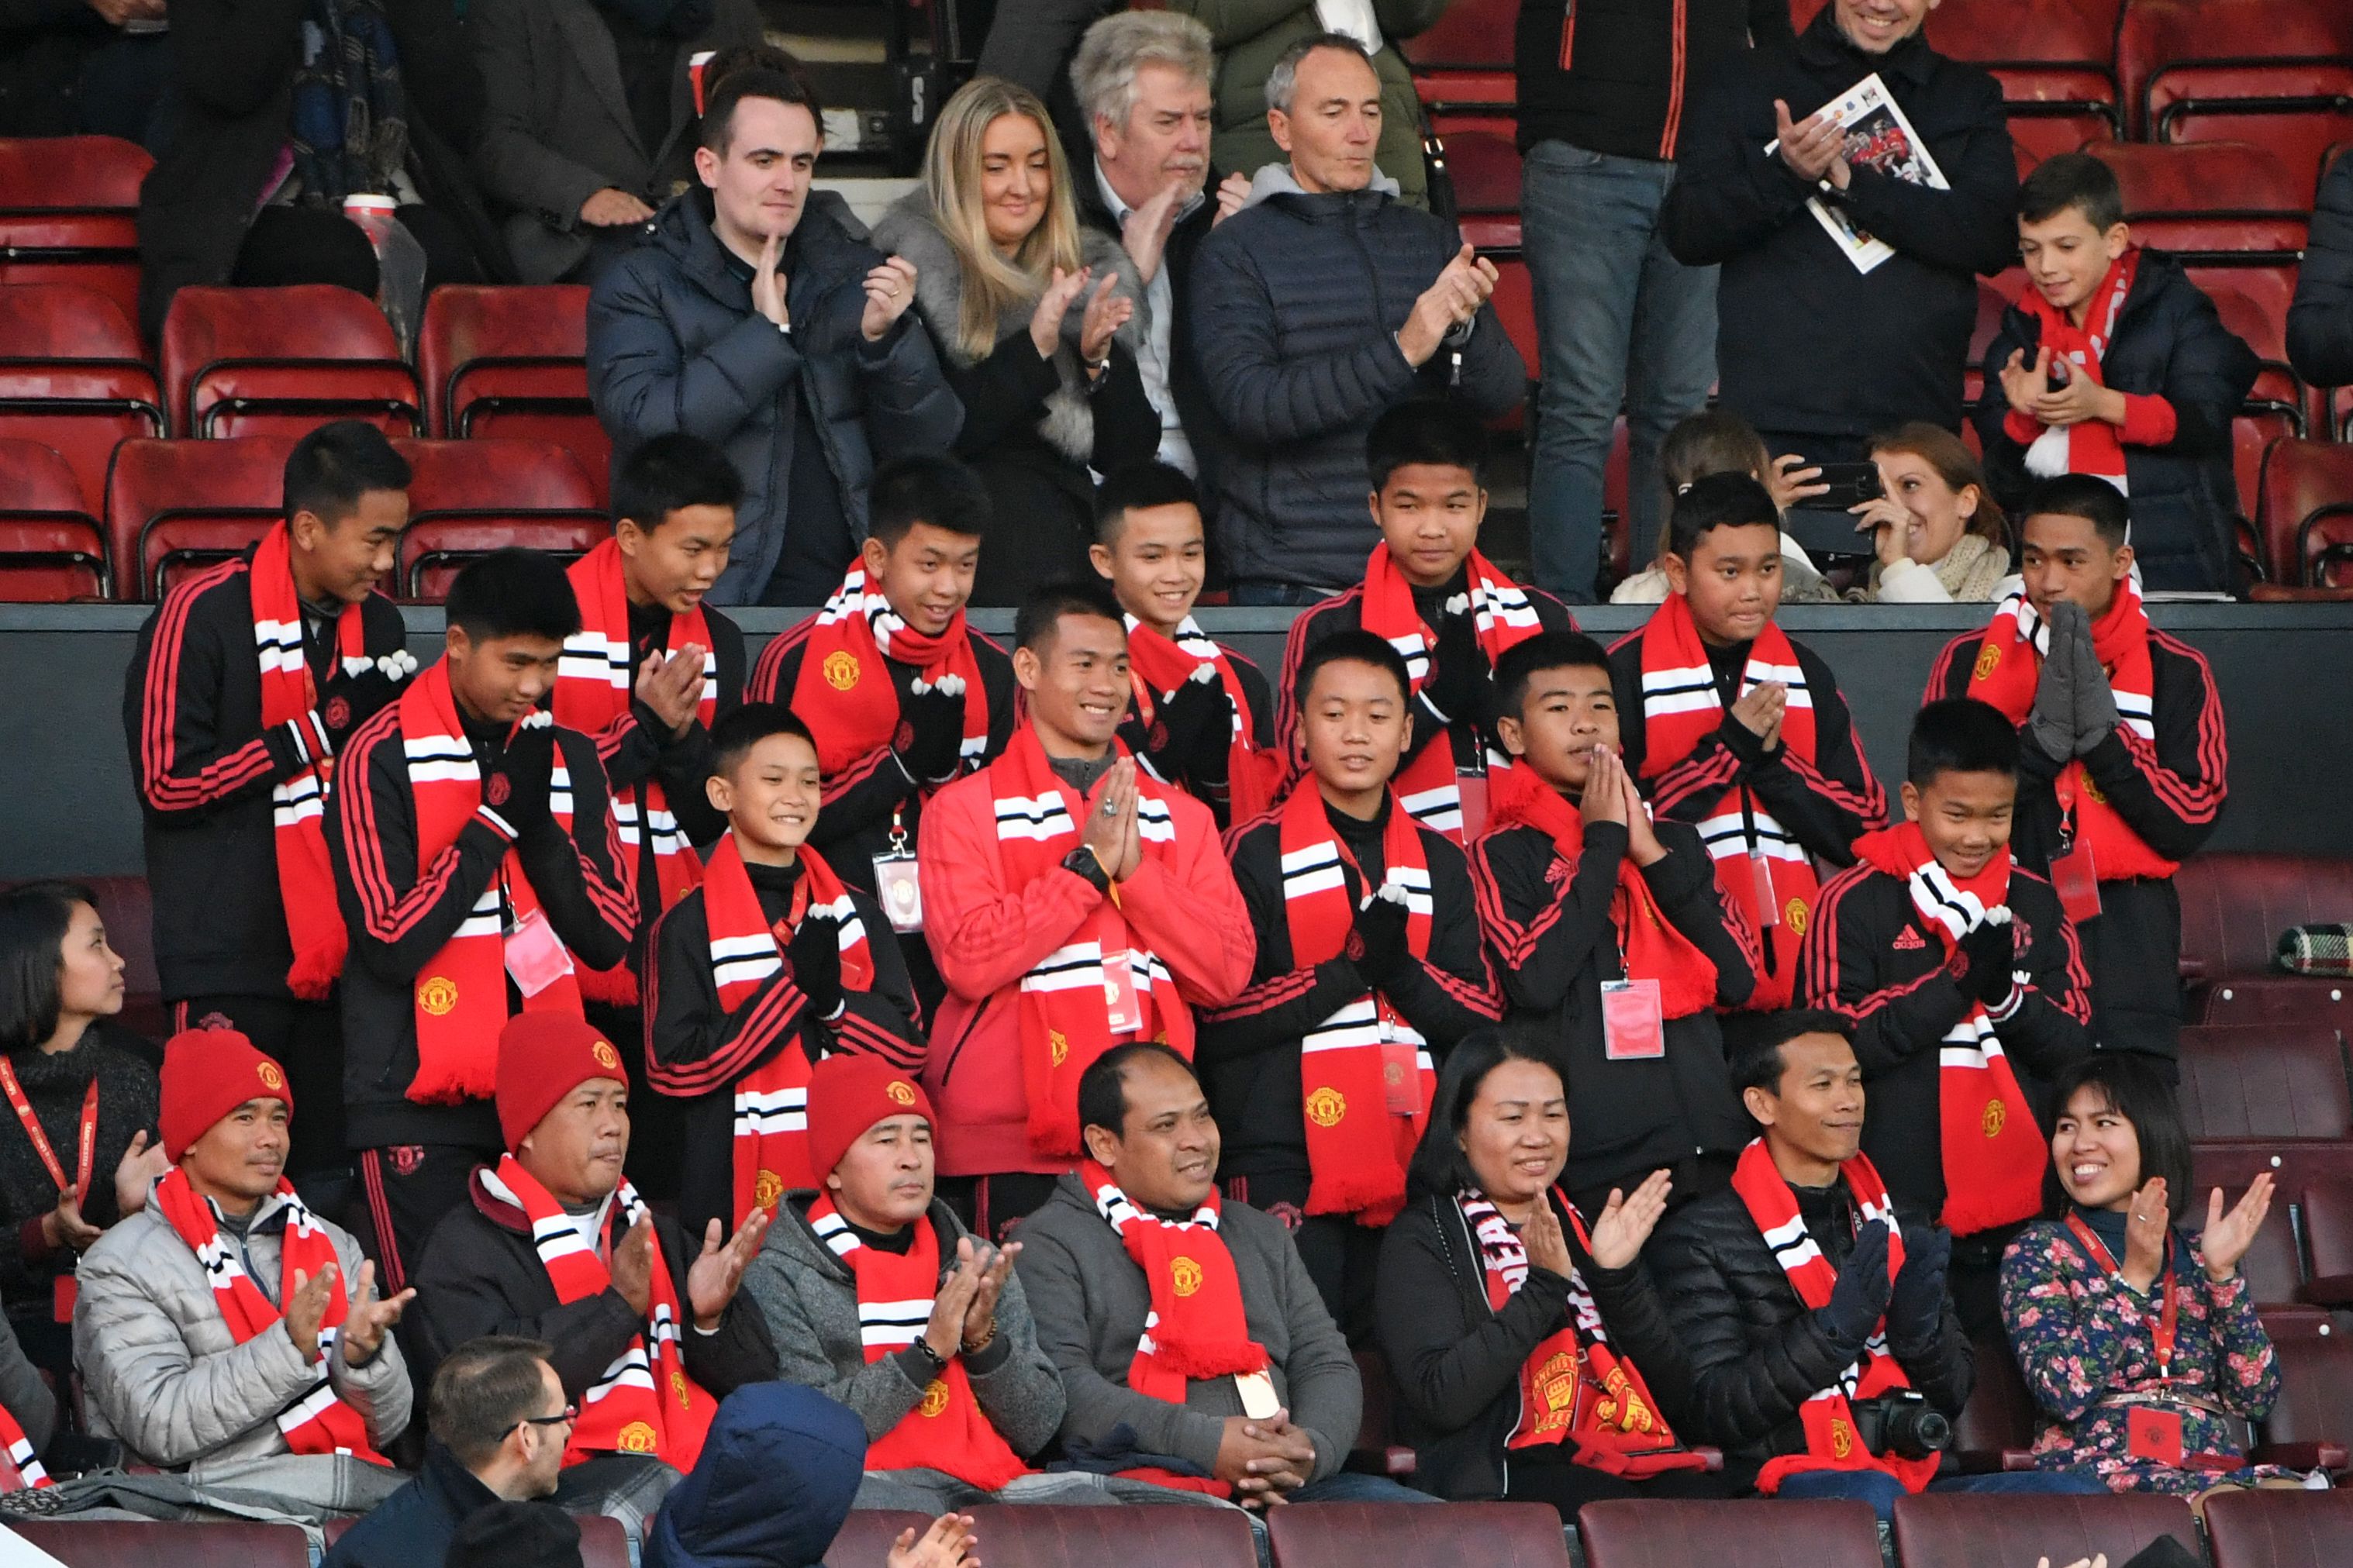 Thai coach Ekkapol Chantawong (center) and members of the "Wild Boars" football team take their seats in the stand for the English Premier League football match between Manchester United and Everton at Old Trafford in Manchester, England, on Oct. 28, 2018. (Paul Ellis—AFP/Getty Images)